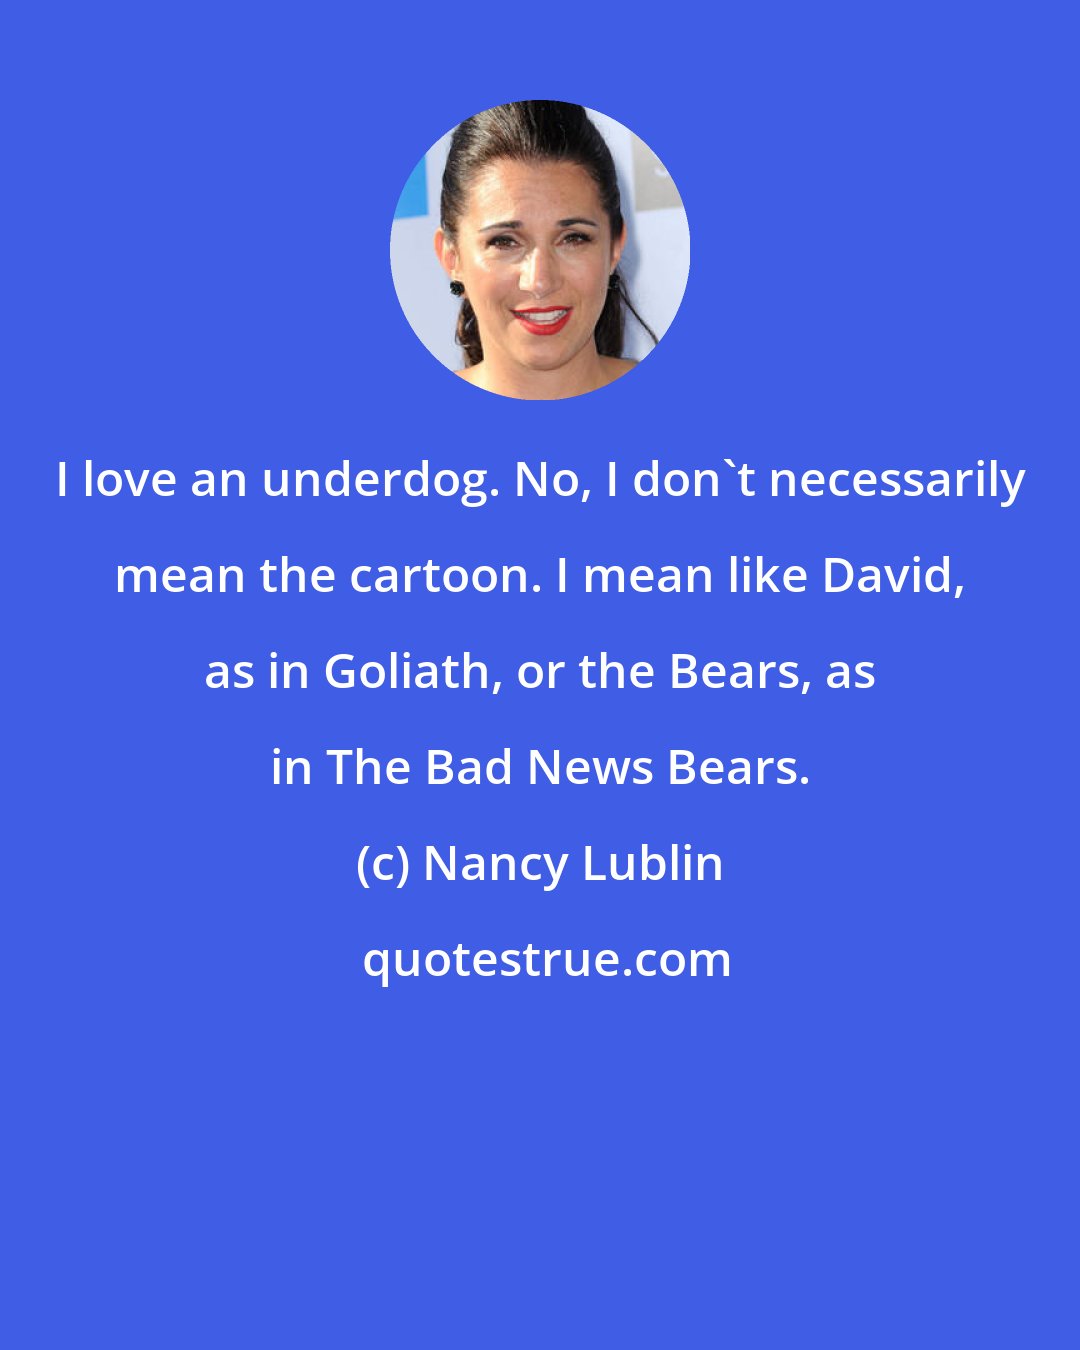 Nancy Lublin: I love an underdog. No, I don't necessarily mean the cartoon. I mean like David, as in Goliath, or the Bears, as in The Bad News Bears.